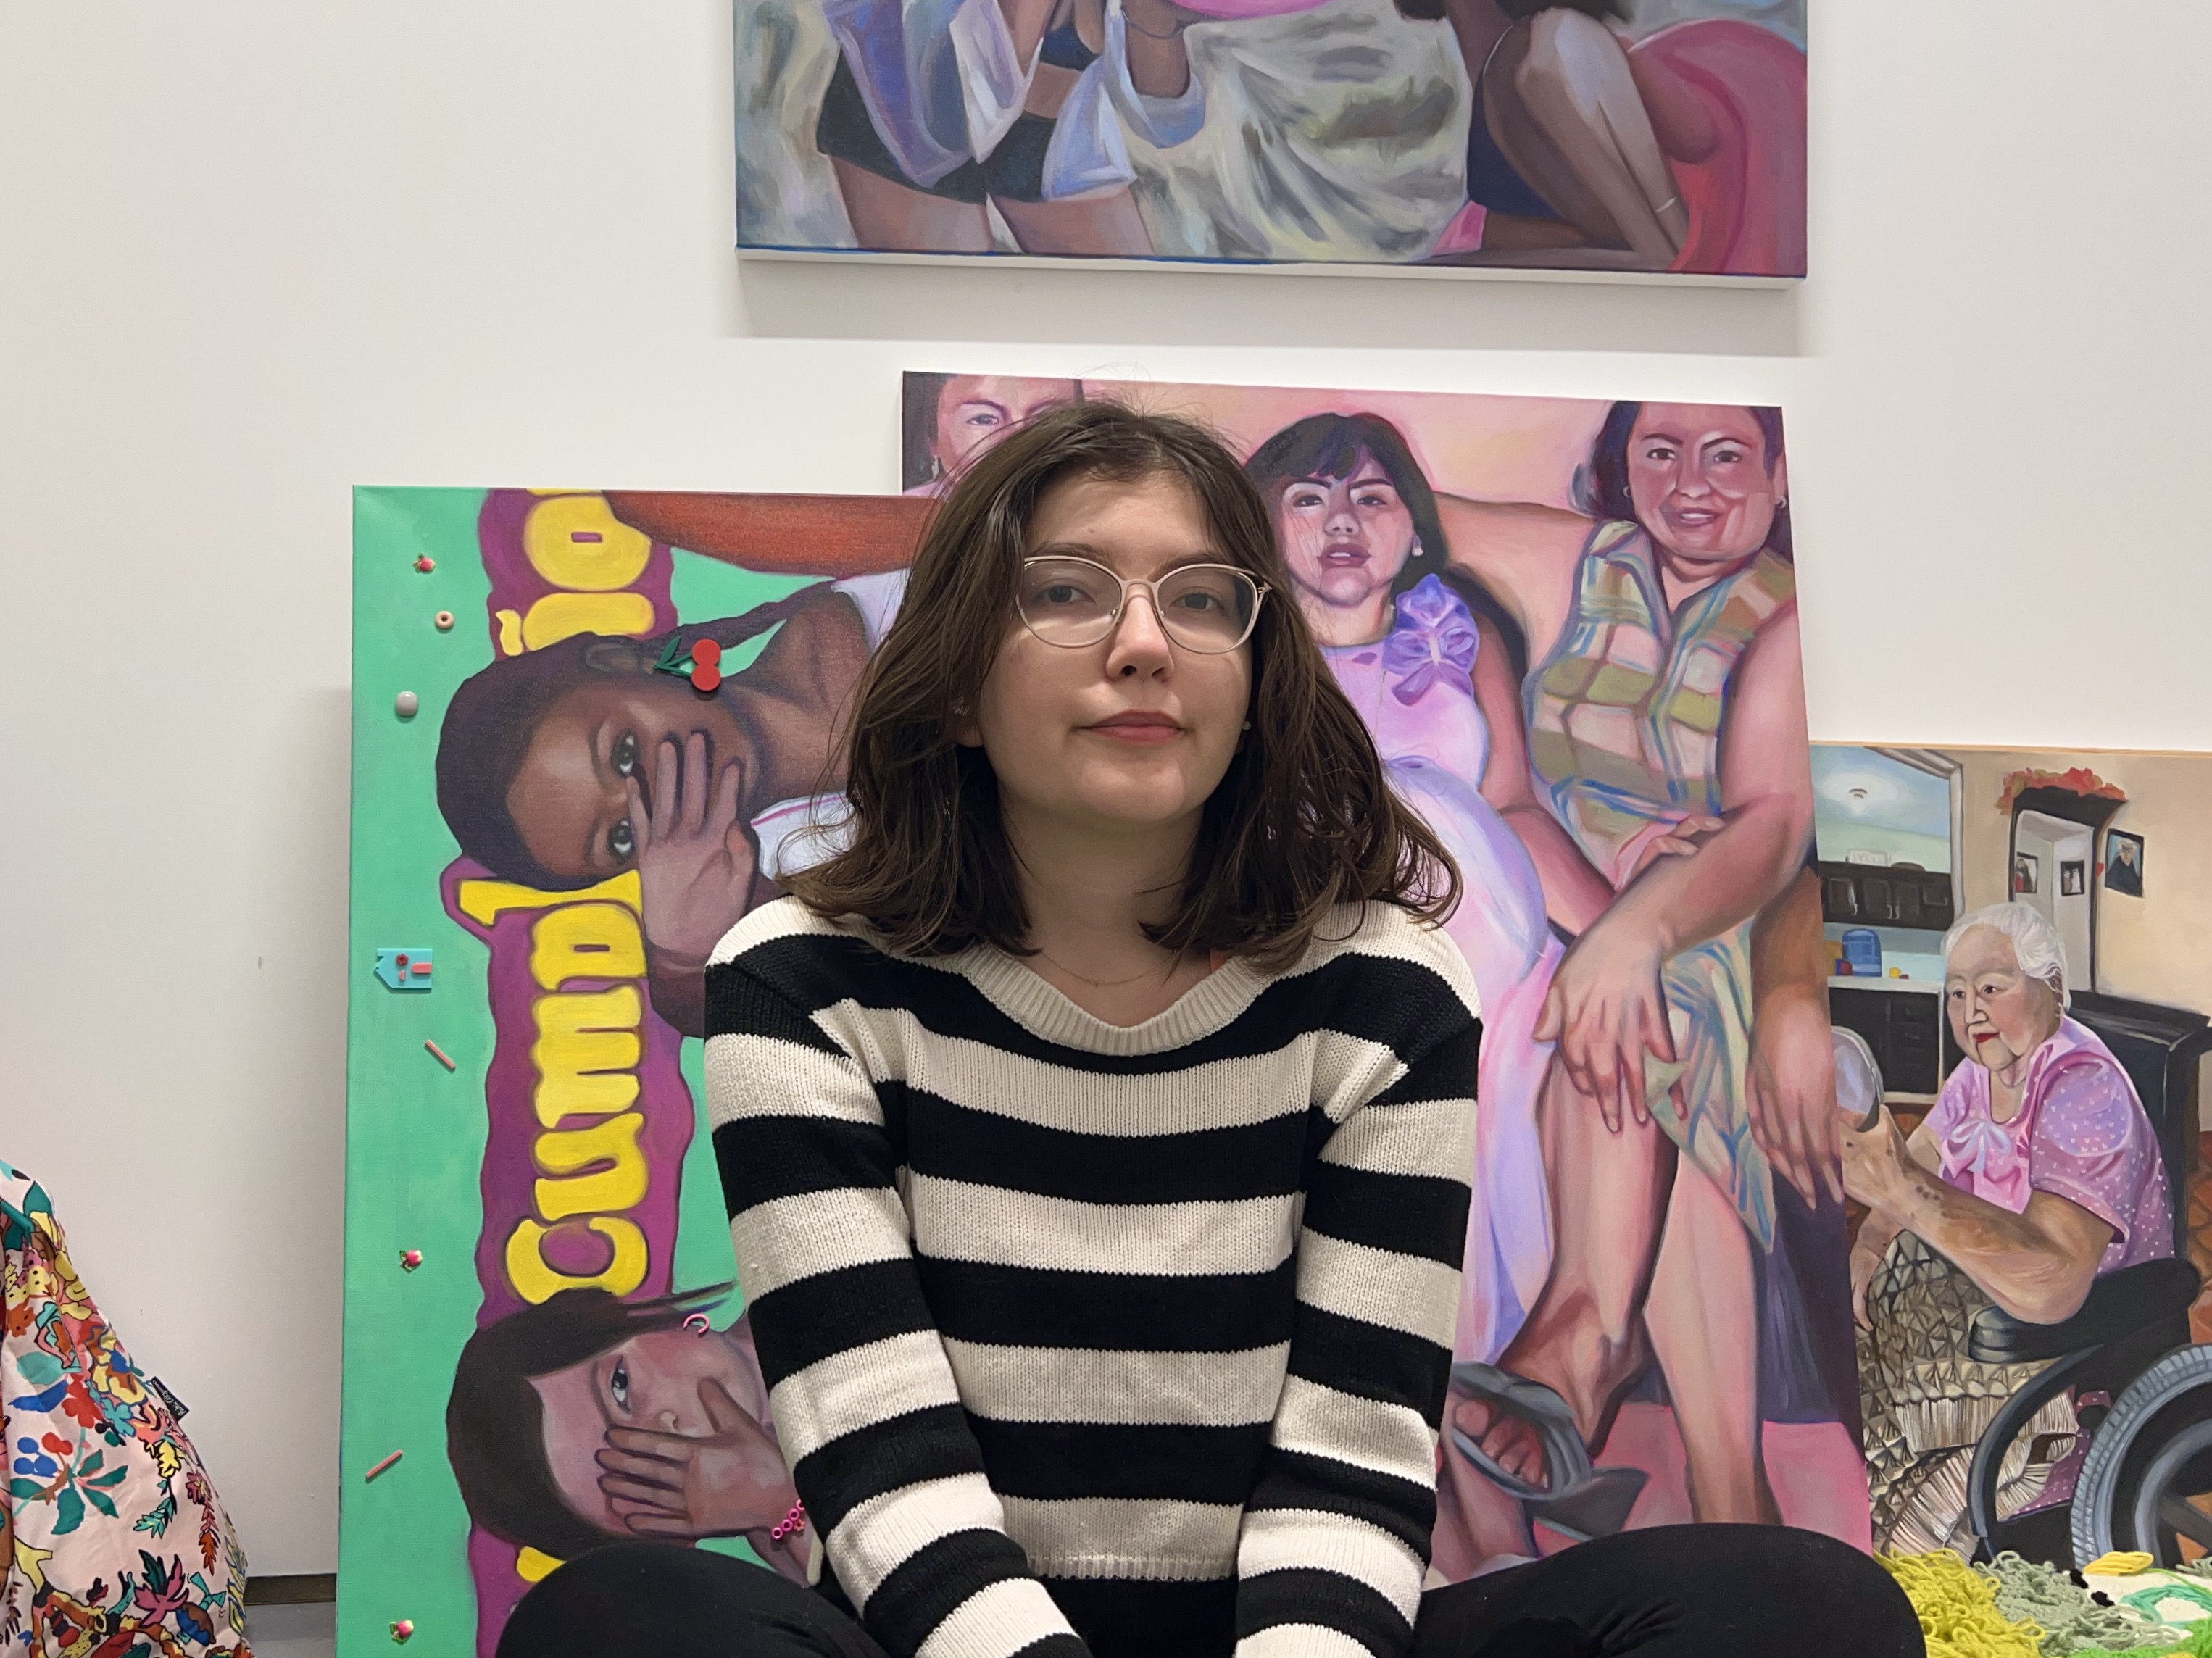 A young woman in a white and black striped shirt sits in front of painted canvasses